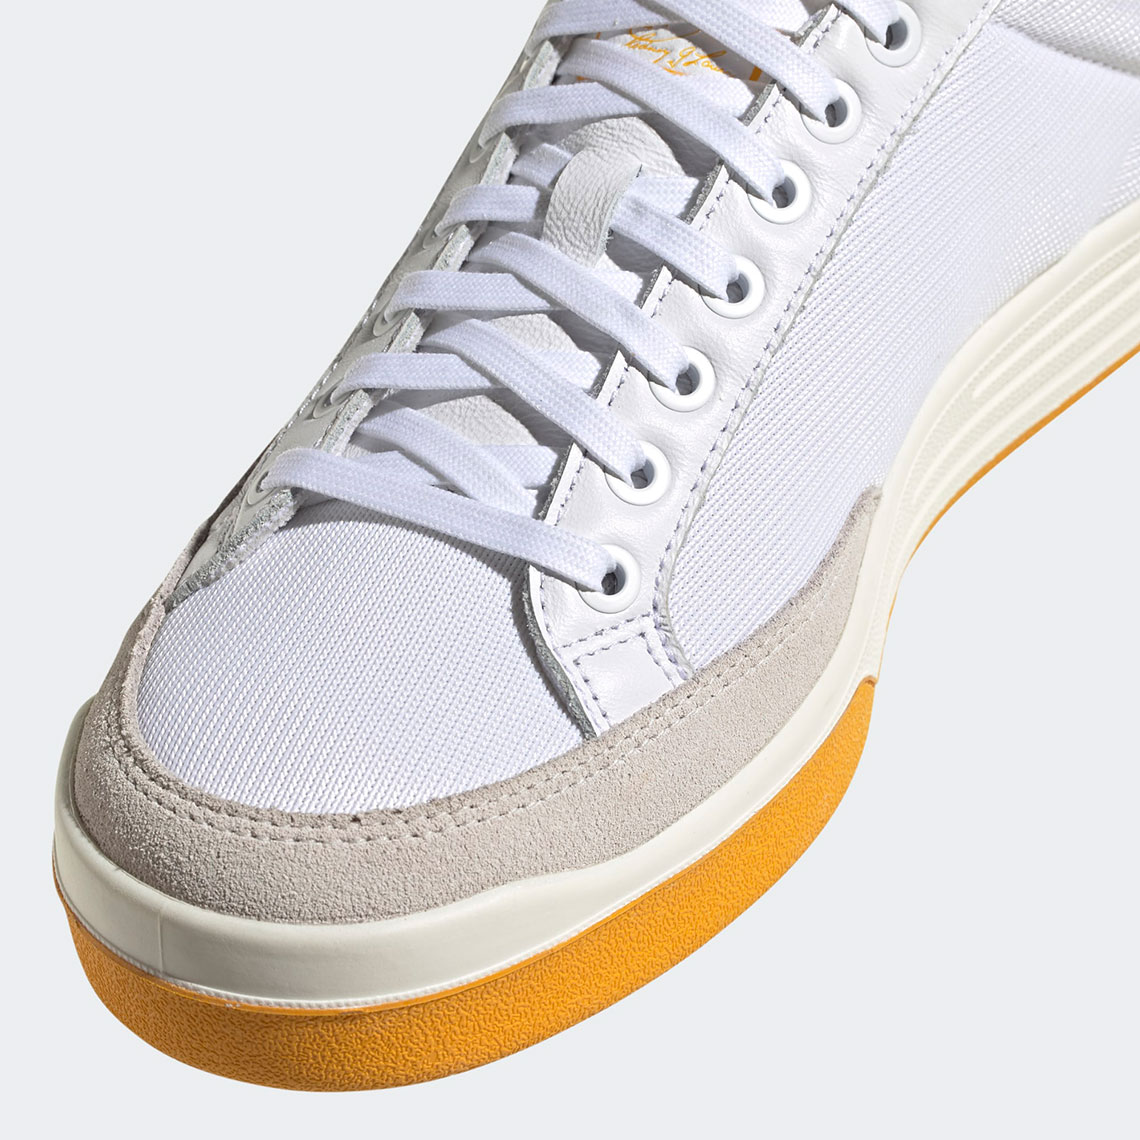 Adidas Rod Laver Cloud buty Team Collegiate Gold Off buty Fy4731 8